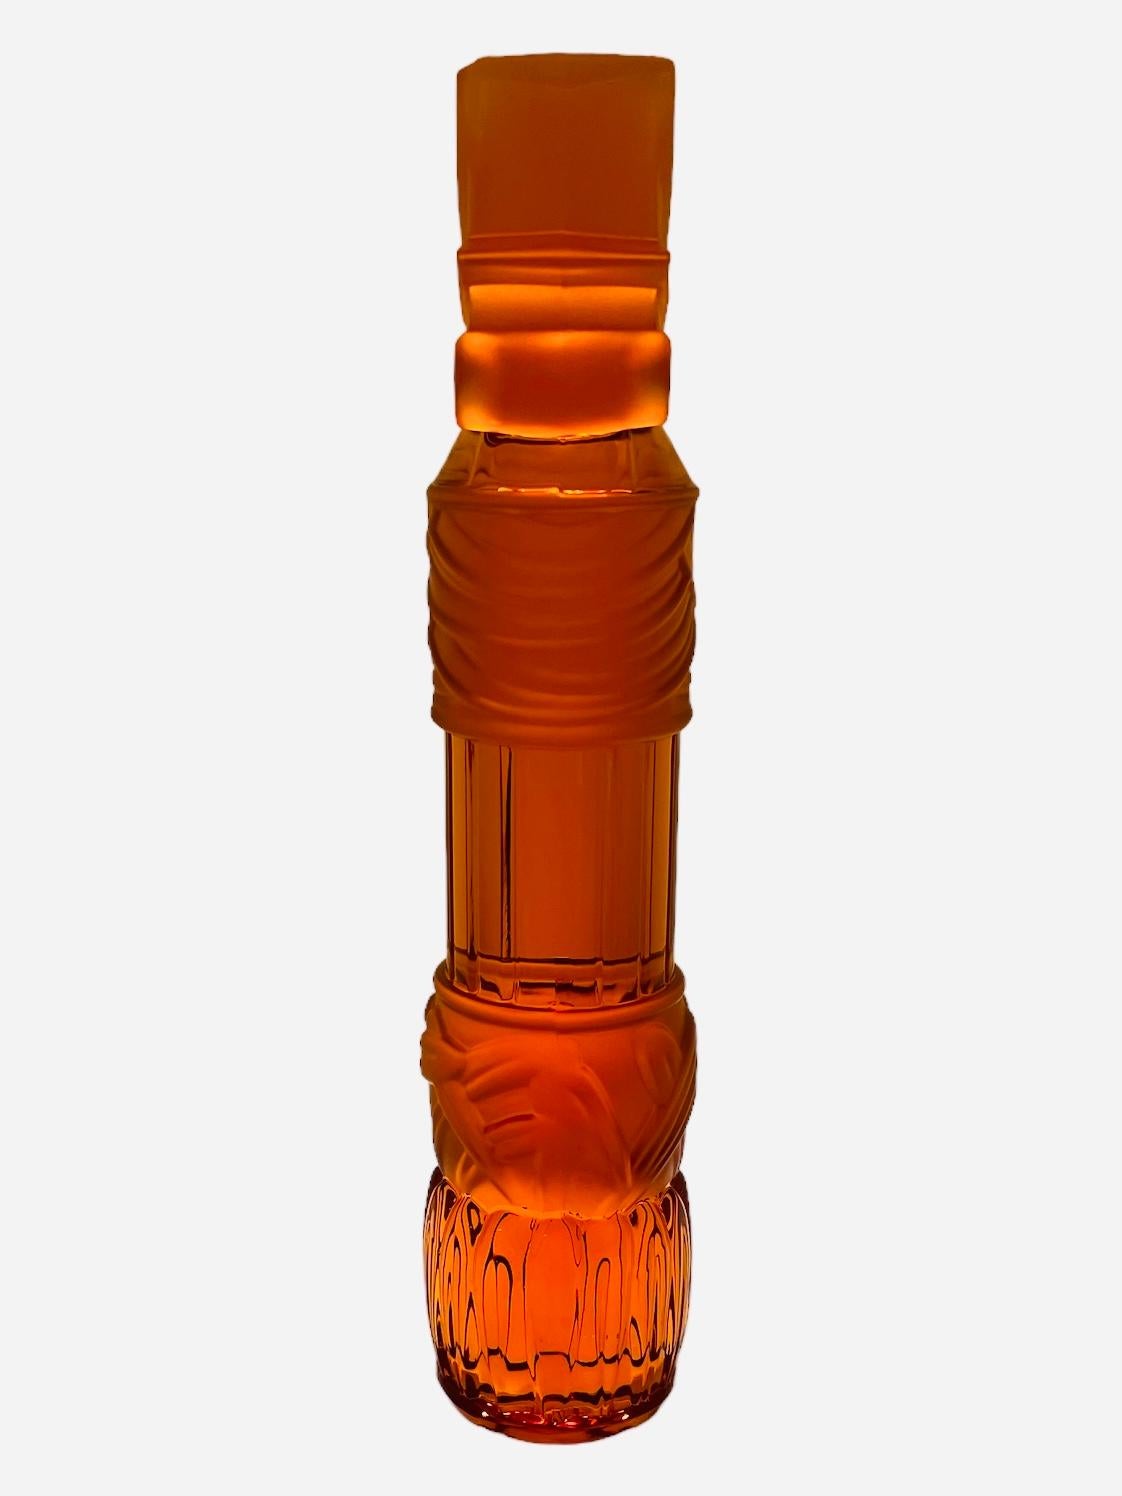 This is a limited edition Saint Louis Cut Crystal “Le Lotus” Totem. It depicts a clear and frosted amber crystal tall cylindrical totem decorated with a finial made of a rectangular block with four leaves with some scrolls under it.  Below that, the